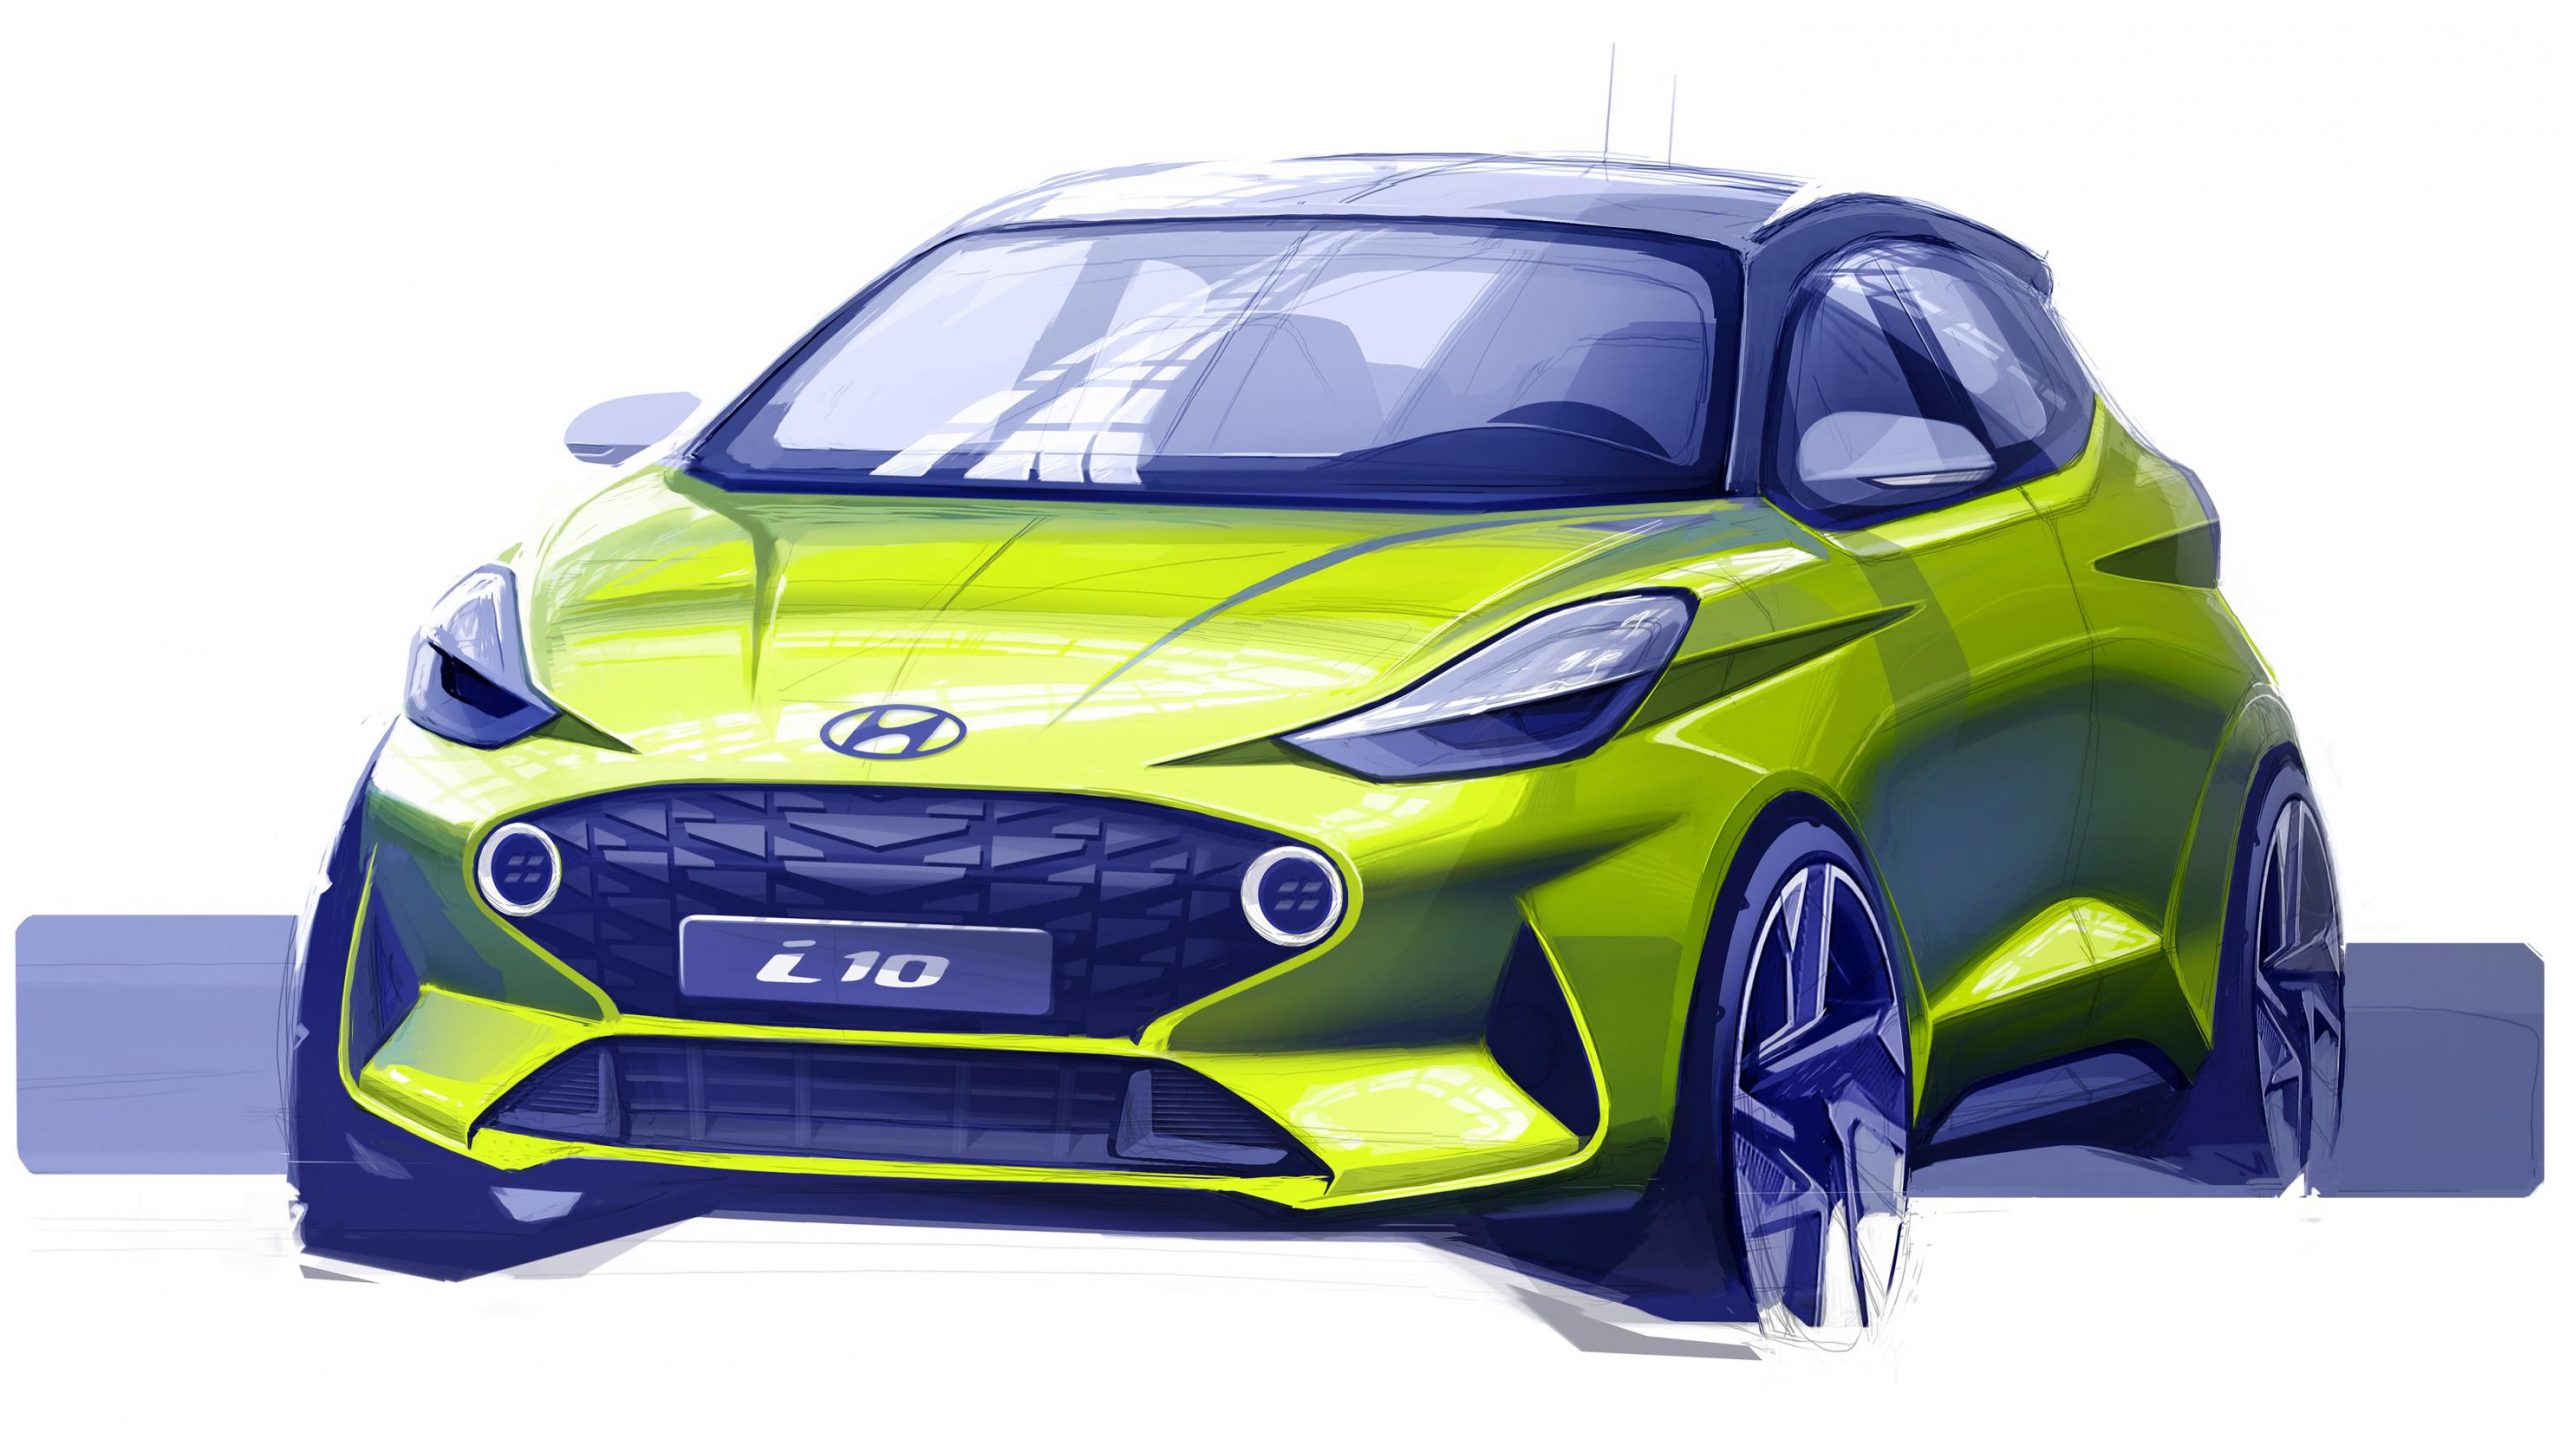 2020 Hyundai i10 previewed, likely topped with 1.0 turbo